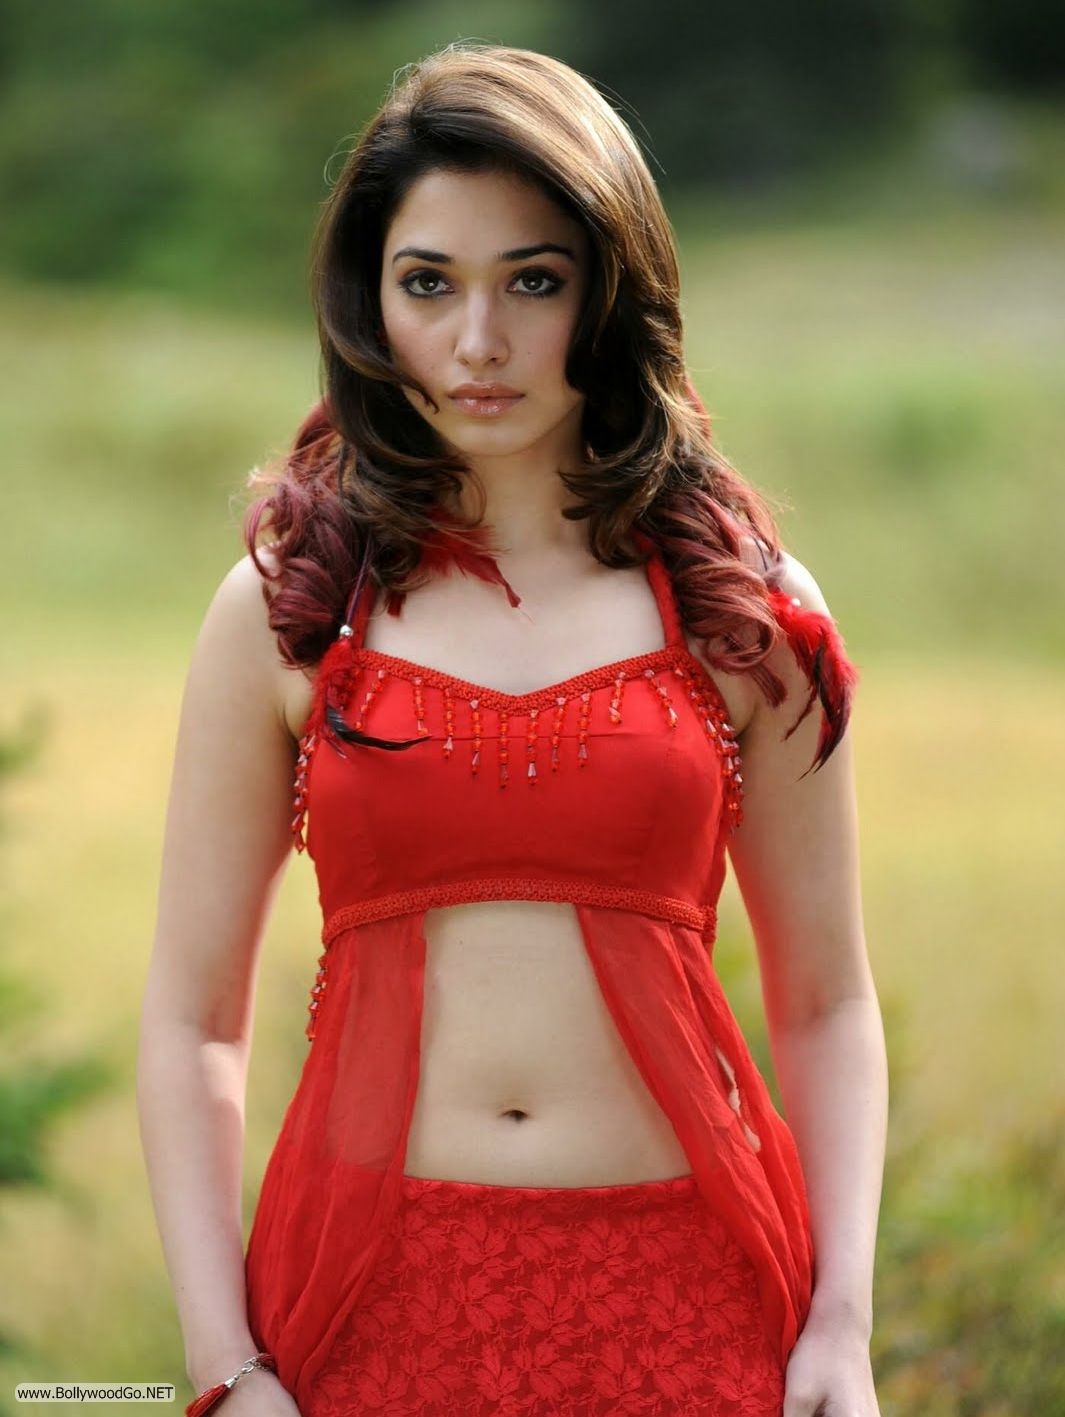 Tamanna Xxxx Video - Spicy Tamanna Bhatia Pictures | Hot Celebrity Pic